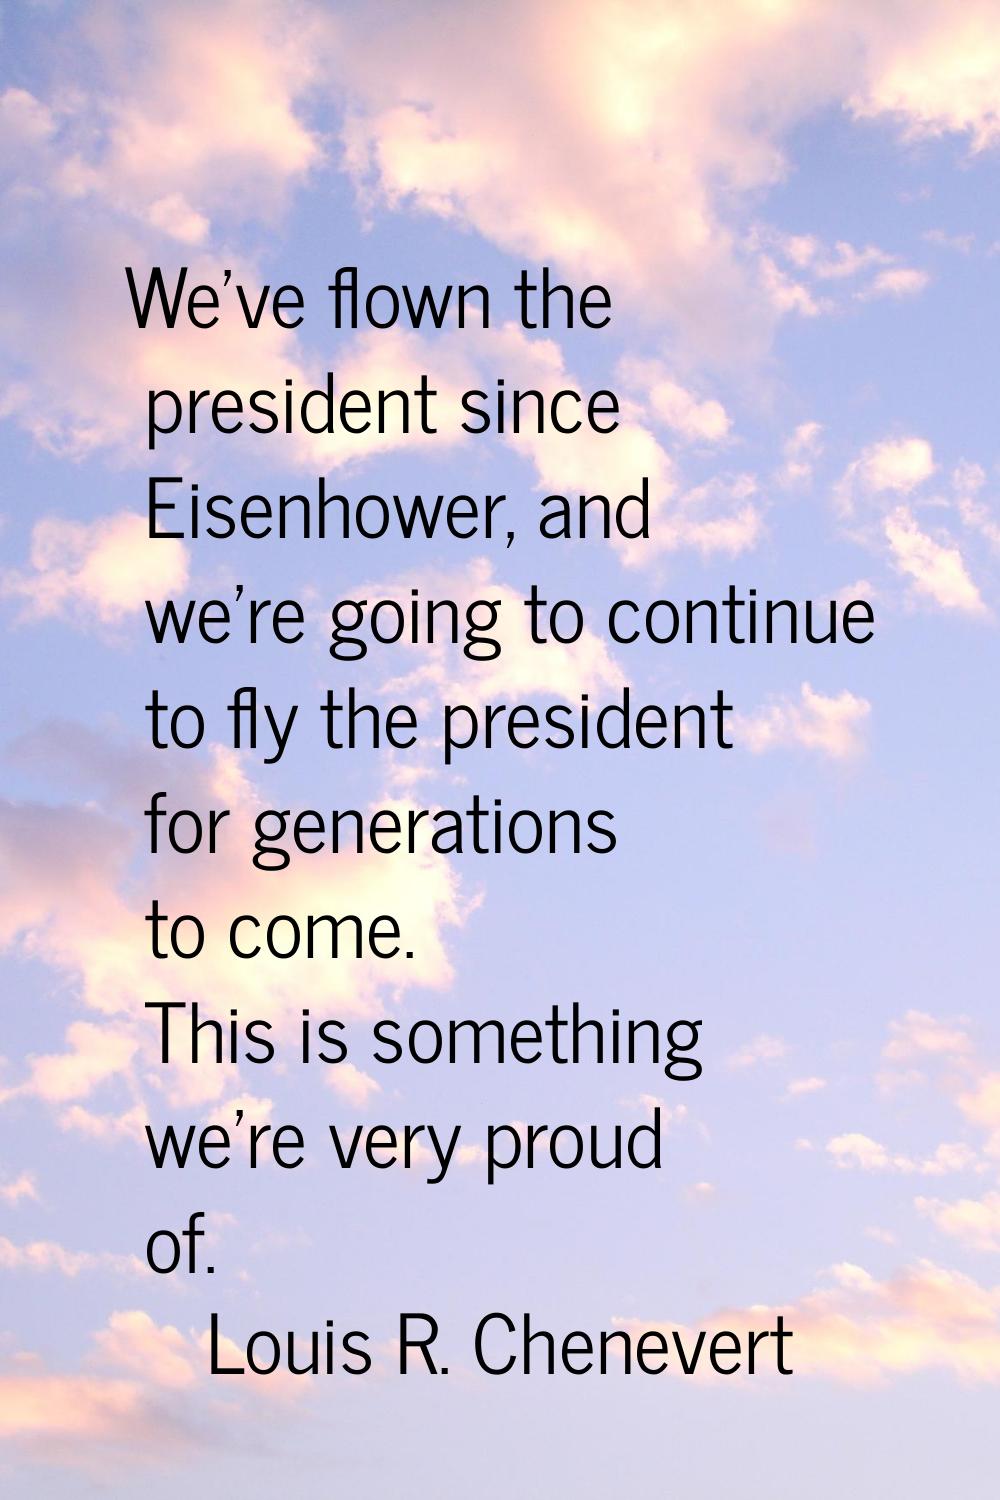 We've flown the president since Eisenhower, and we're going to continue to fly the president for ge